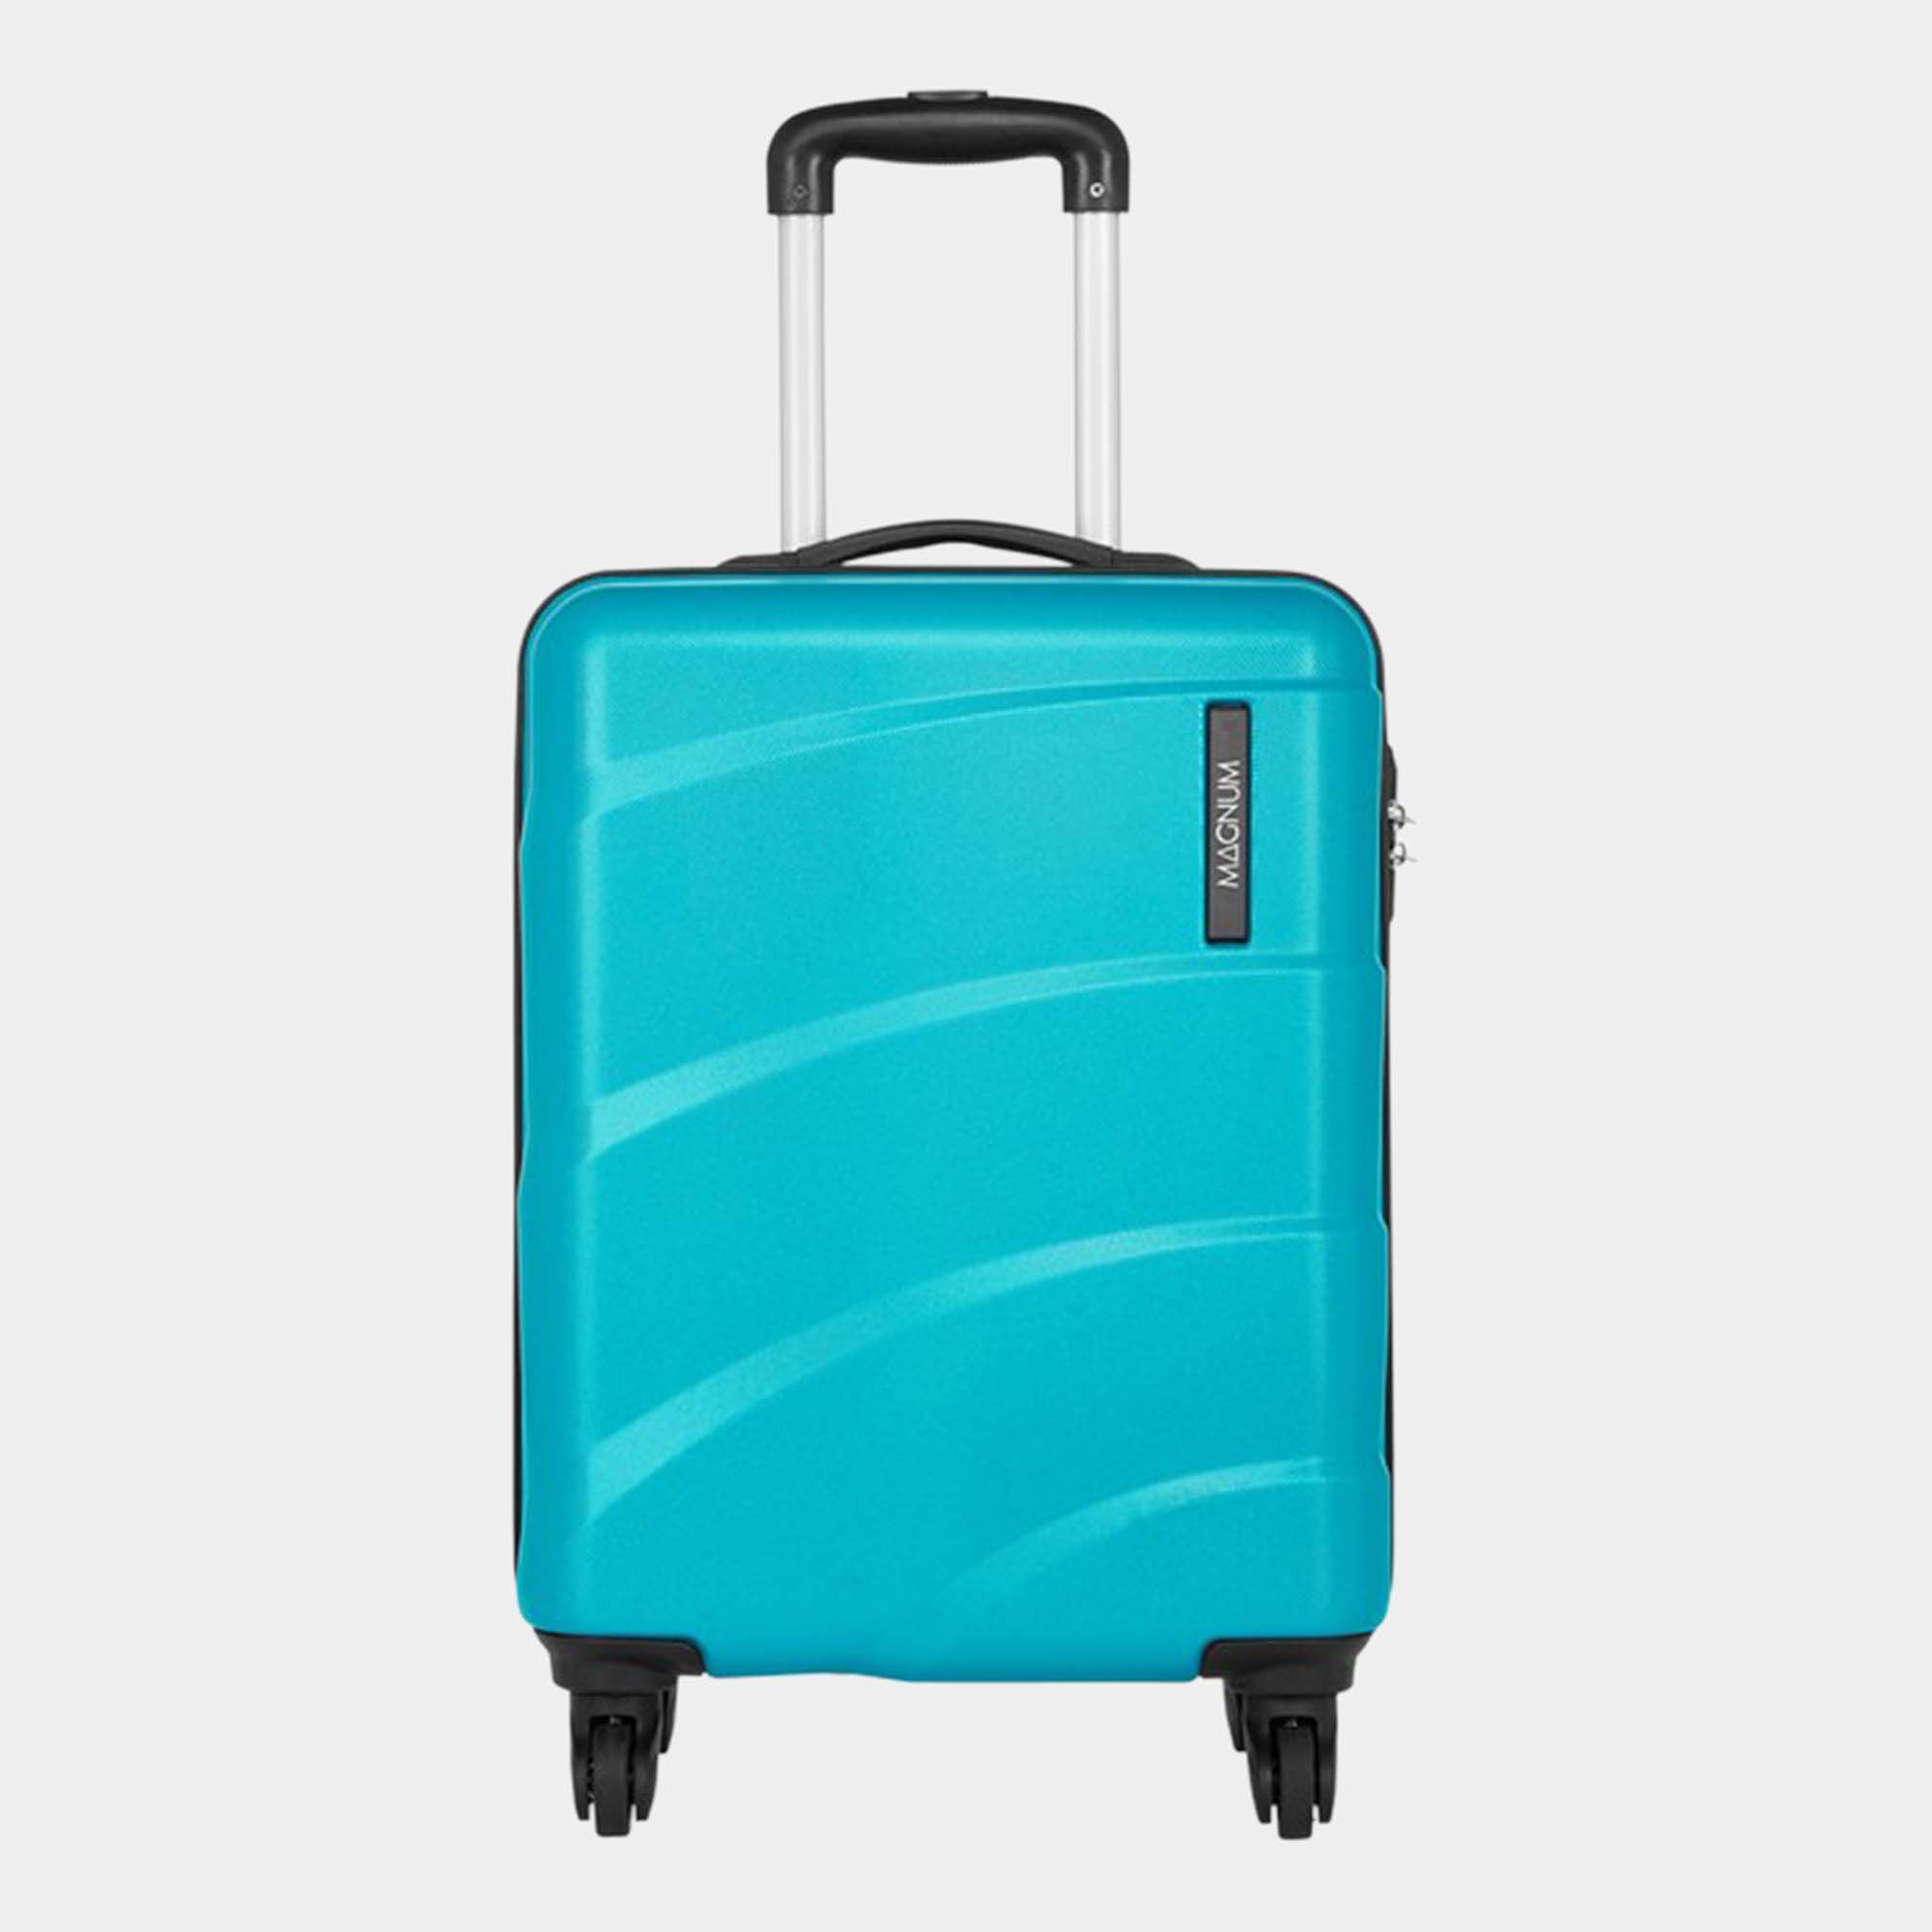 Buy Safari Trolley Bags Set of 3 Sharp Antiscratch Trolley Bags 55, 65 & 77  Cms Small, Medium & Large PP Hard Sided 4 Spinner Wheels Luggage Bag (Blue)  at Amazon.in